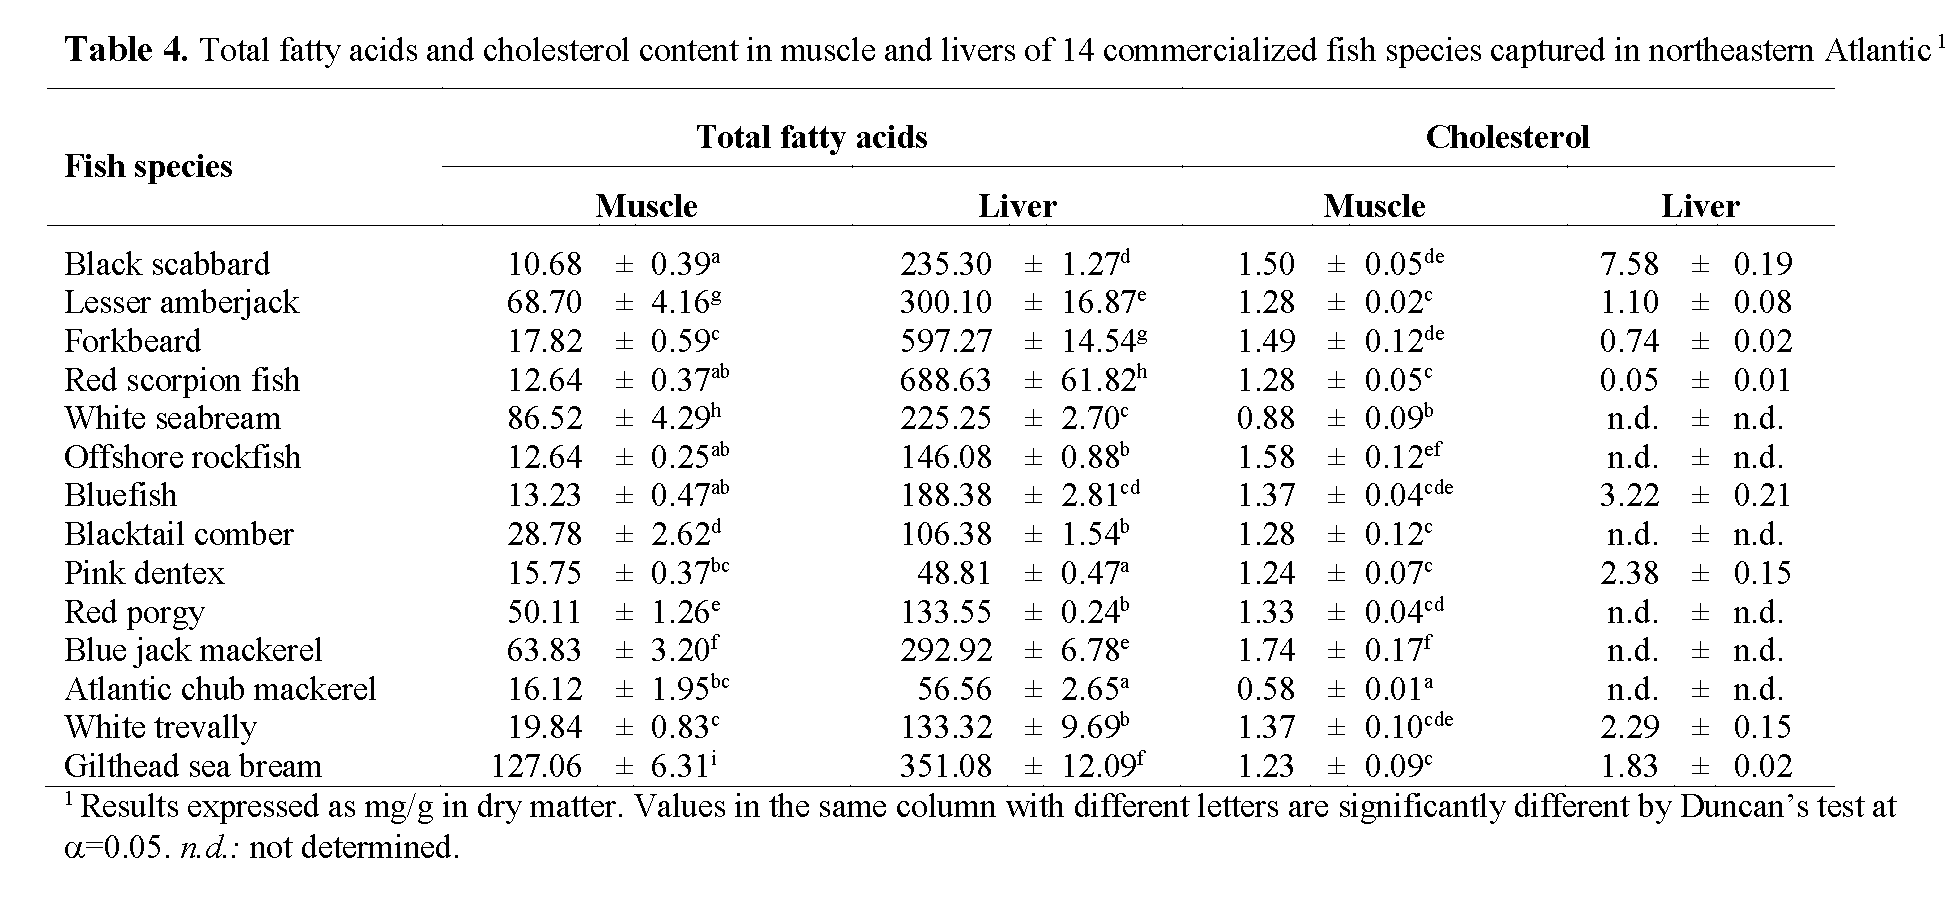 Cholesterol In Seafood Chart